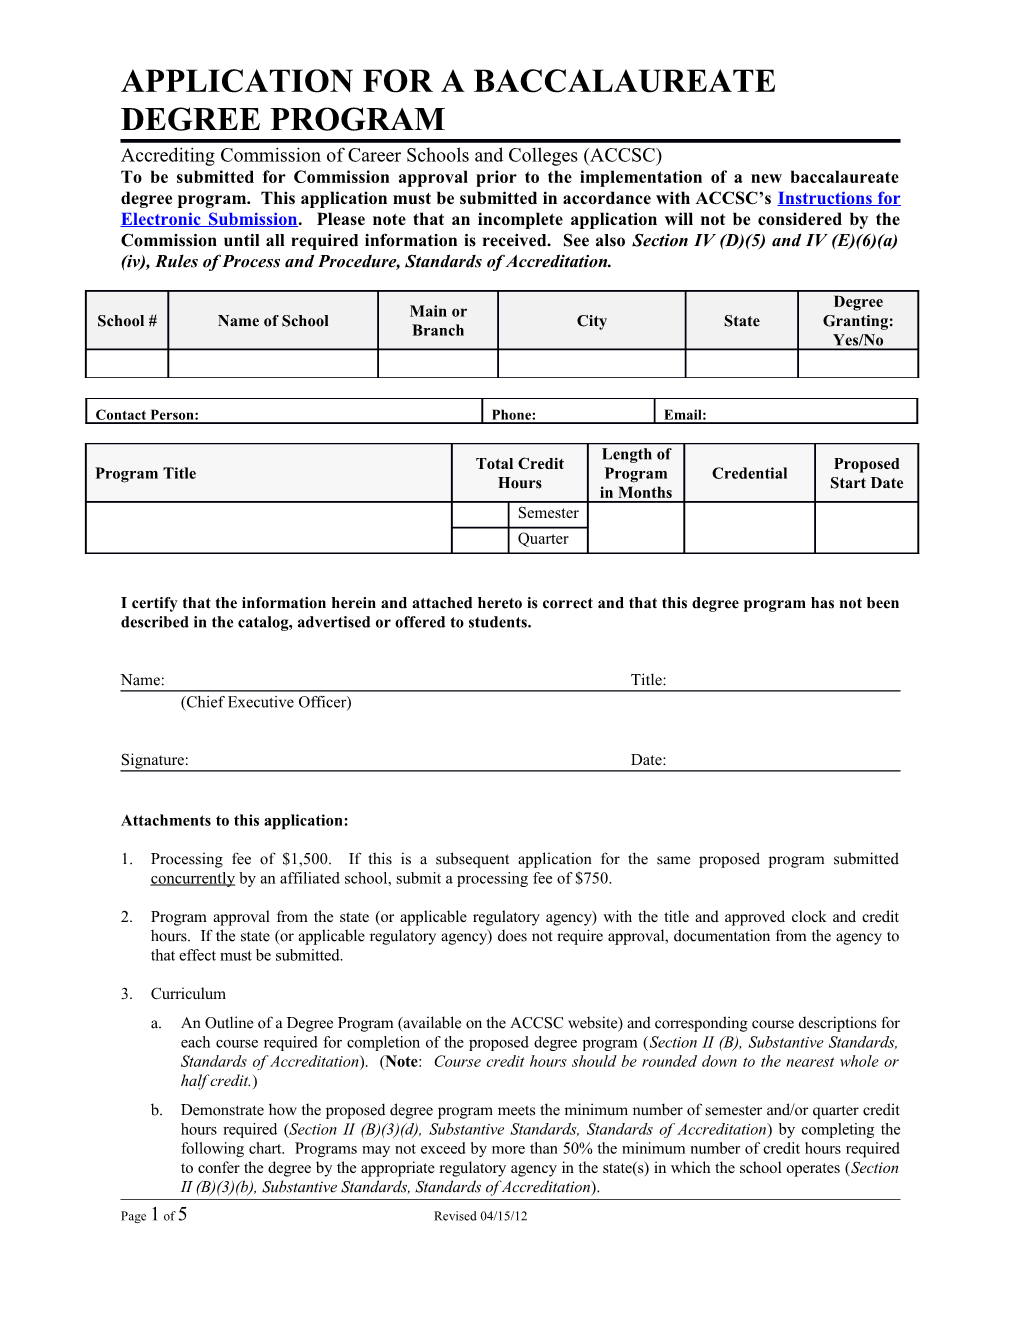 Application for a Baccalaureate Degree Program